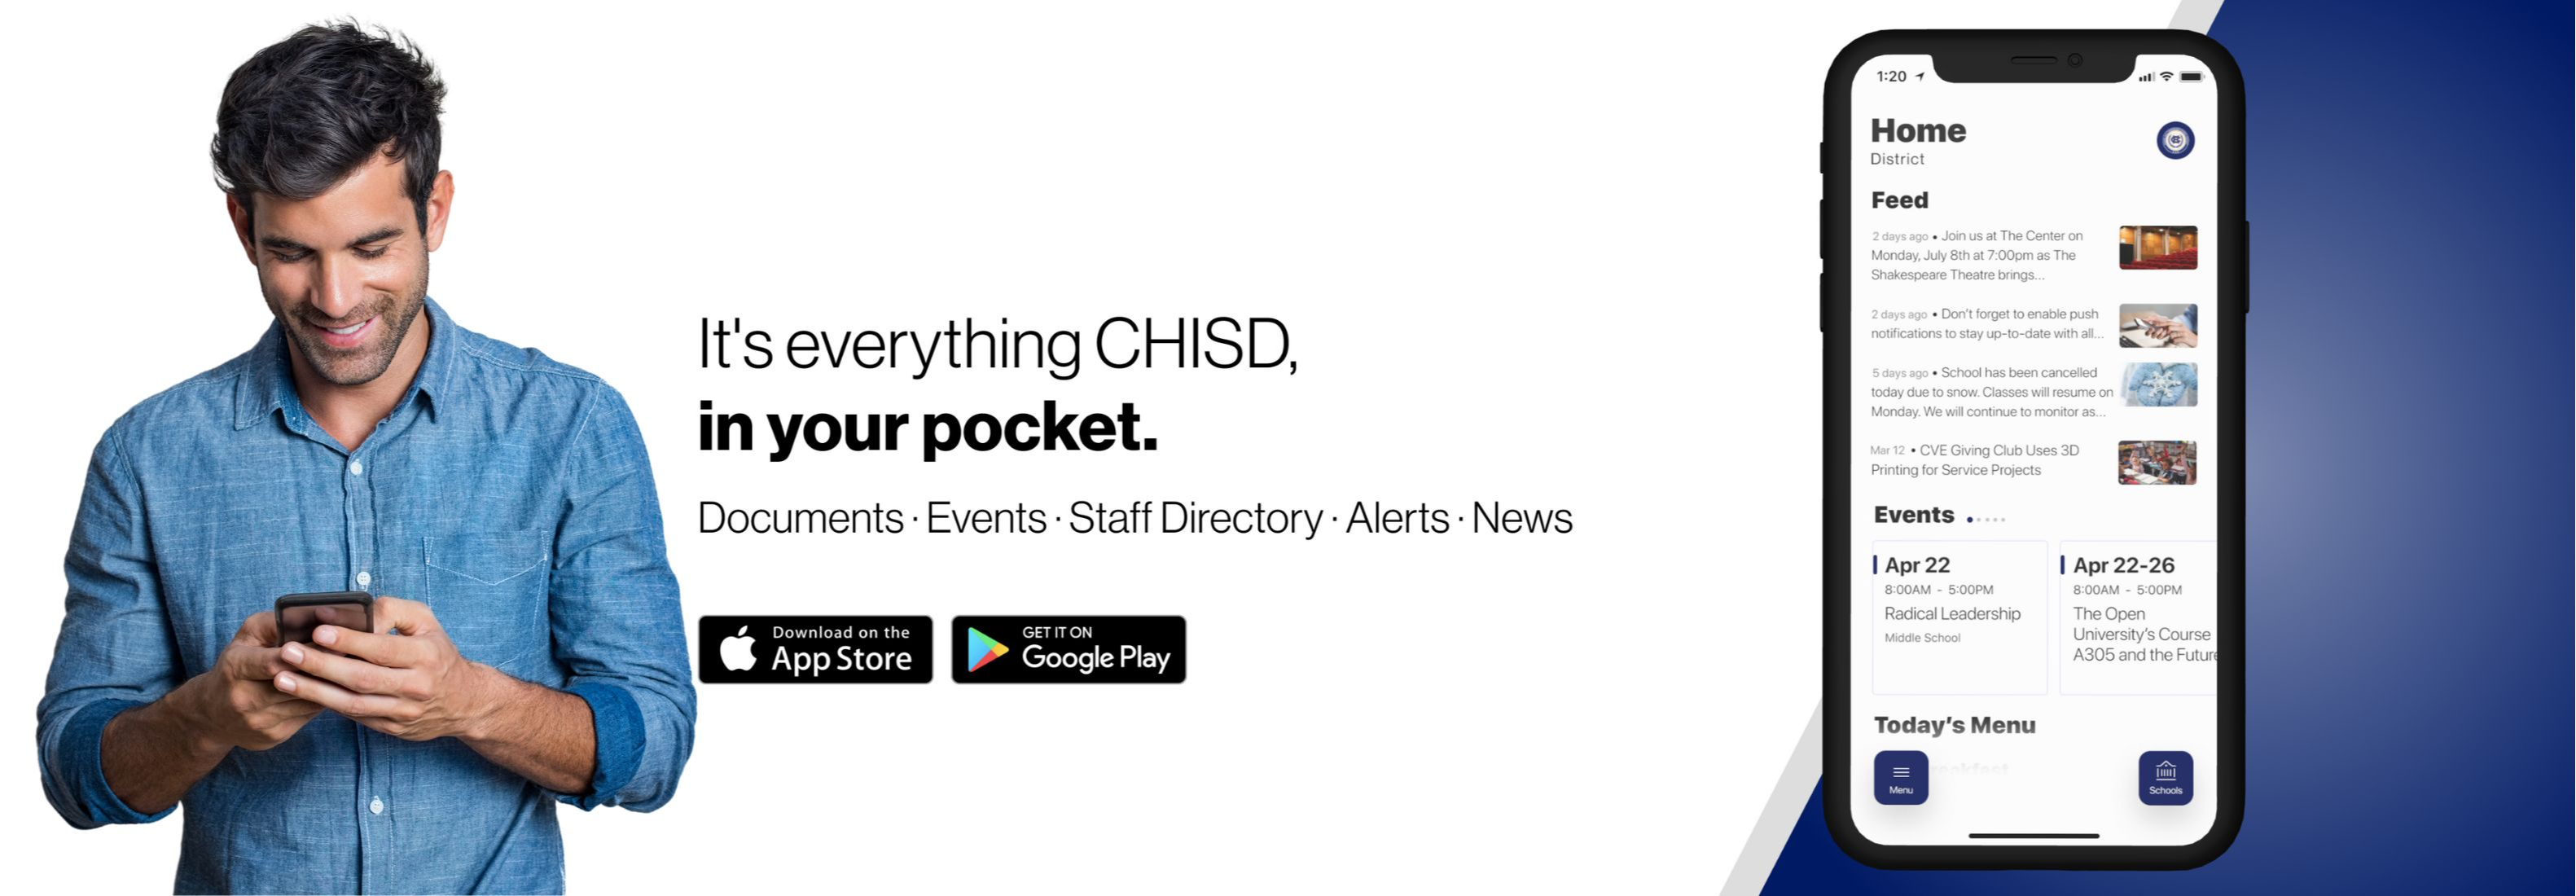 Chapel Hill ISD Launches New App